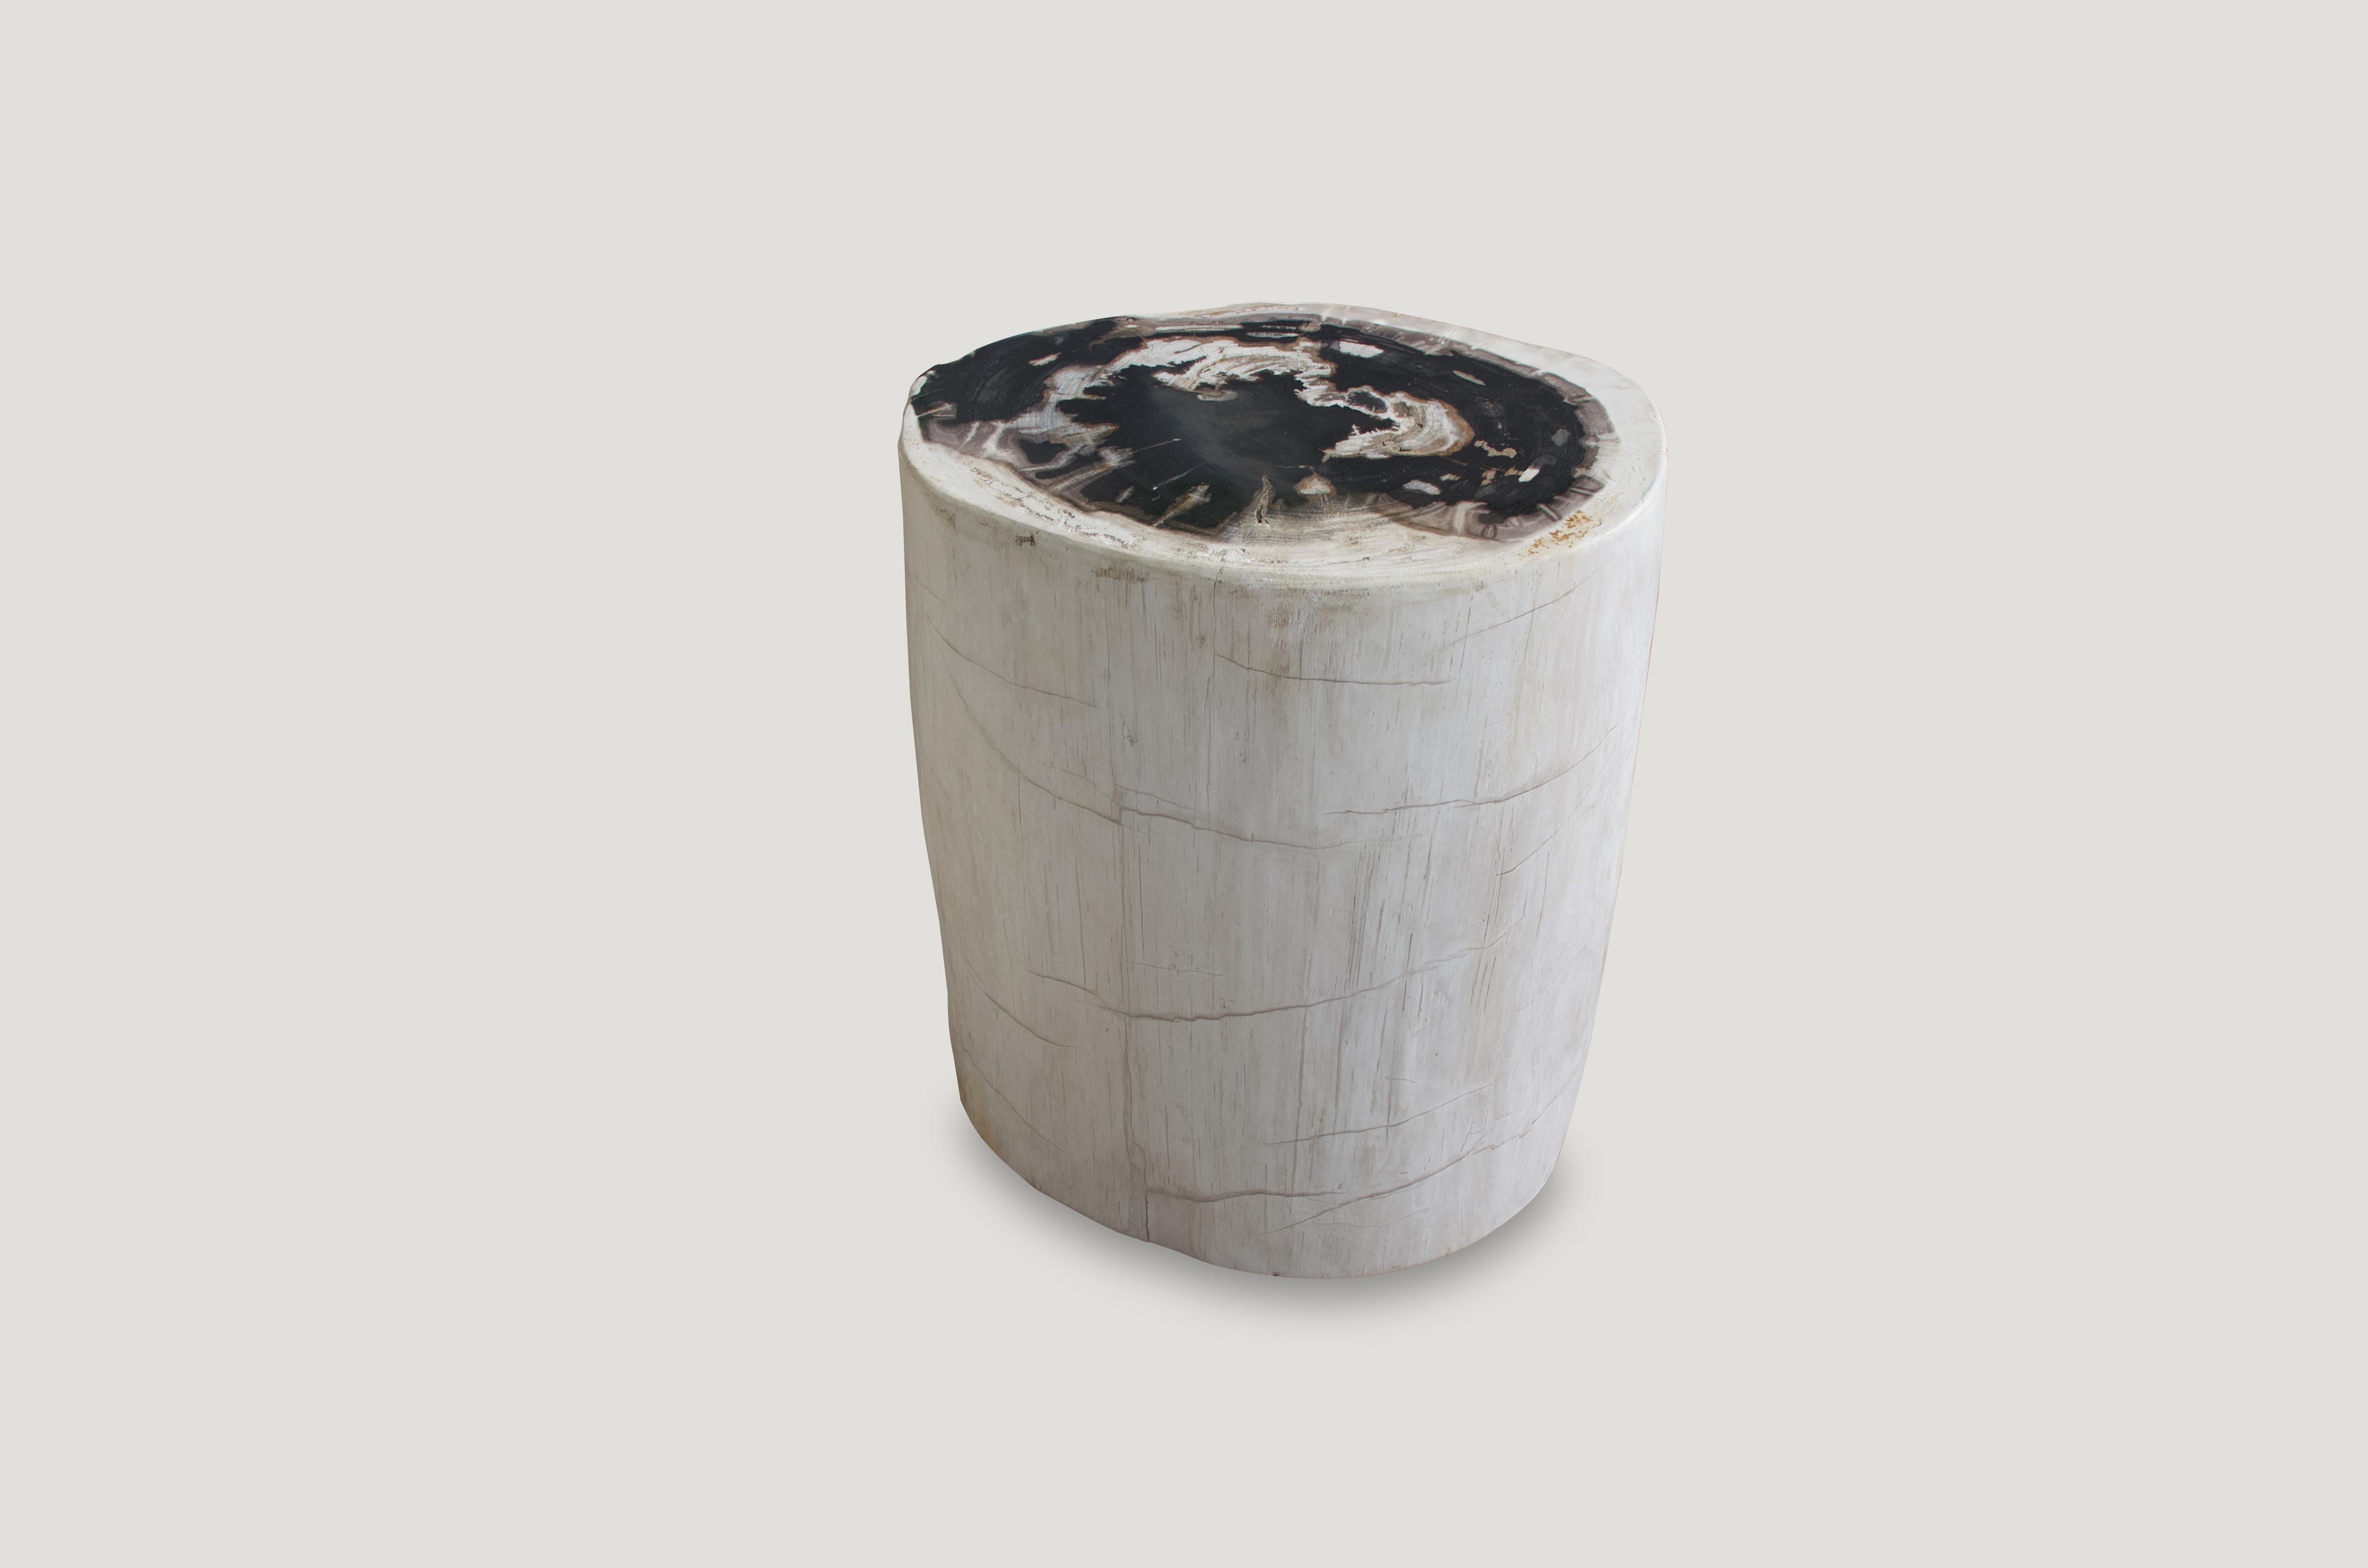 Bold contrasting tones in this high quality petrified wood side table or pedestal.

As with a diamond, we polish the highest quality fossilized petrified wood, using our latest ground breaking technology, to reveal its natural beauty and